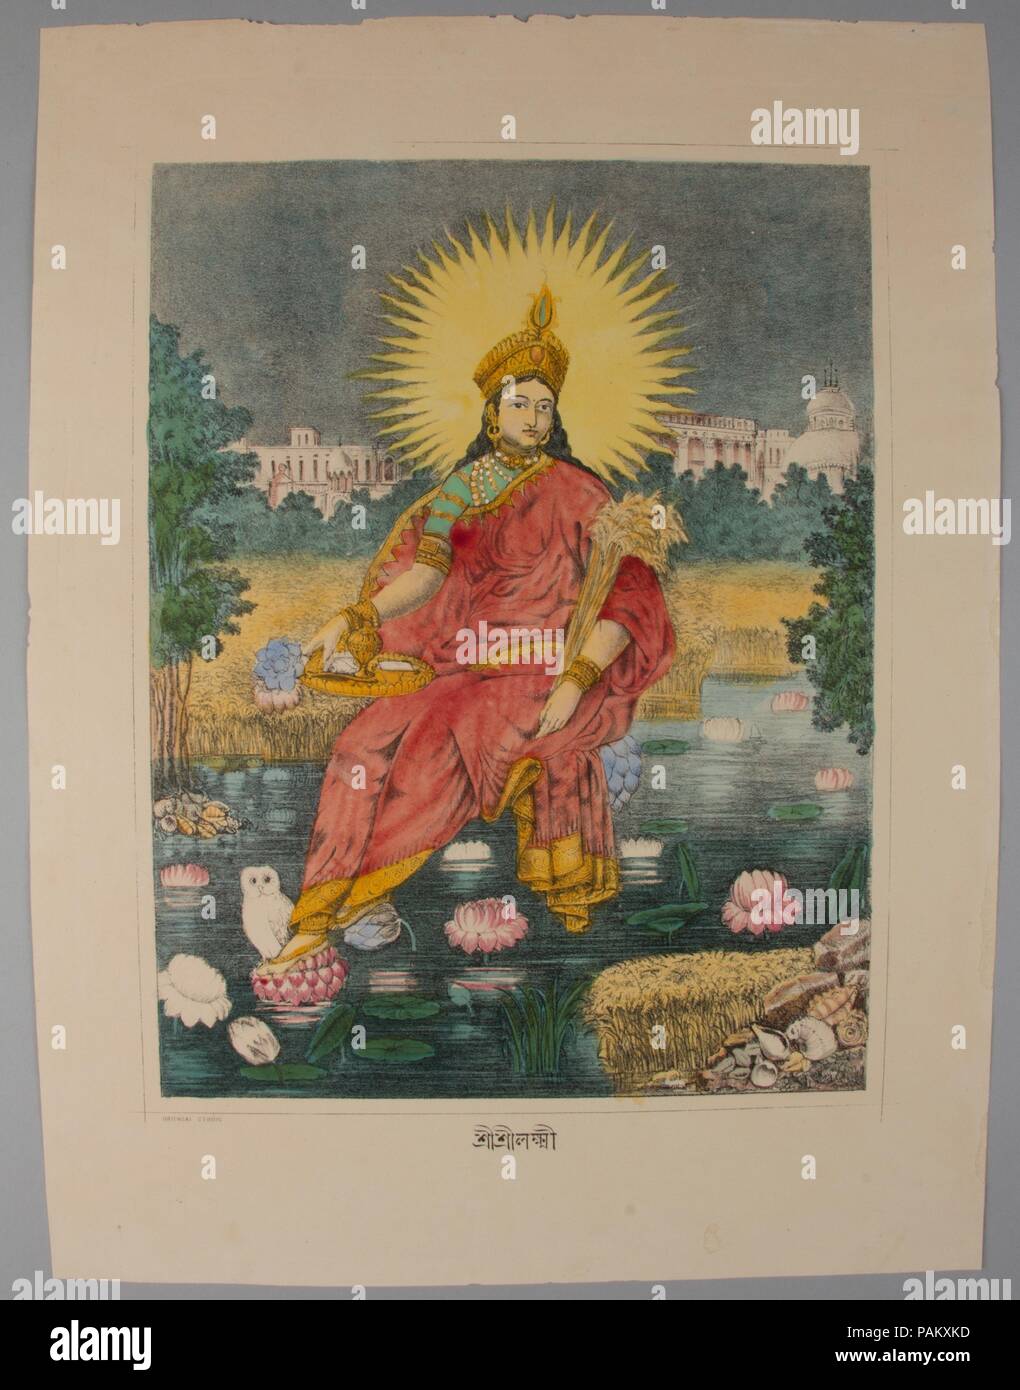 Shri Shri Lakshmi. Culture: India. Dimensions: Image: 11 1/2 × 8 7/8 in. (29.2 × 22.5 cm)  Sheet: 15 3/4 × 12 in. (40 × 30.5 cm). Date: ca. 1880.  Lakshmi enthroned on lotus, with a radiate solar halo, cornucopia-like bundle of wheat and toga-like sari attesting to the strong connection between this print and European depictions of Greek gods.  The buildings in the background juxtapose traditional Bengali temple architecture with the neo-classical European architecture of colonial Calcutta, further amplifying the casting of a traditional deity in neo-classical guise. Museum: Metropolitan Museu Stock Photo